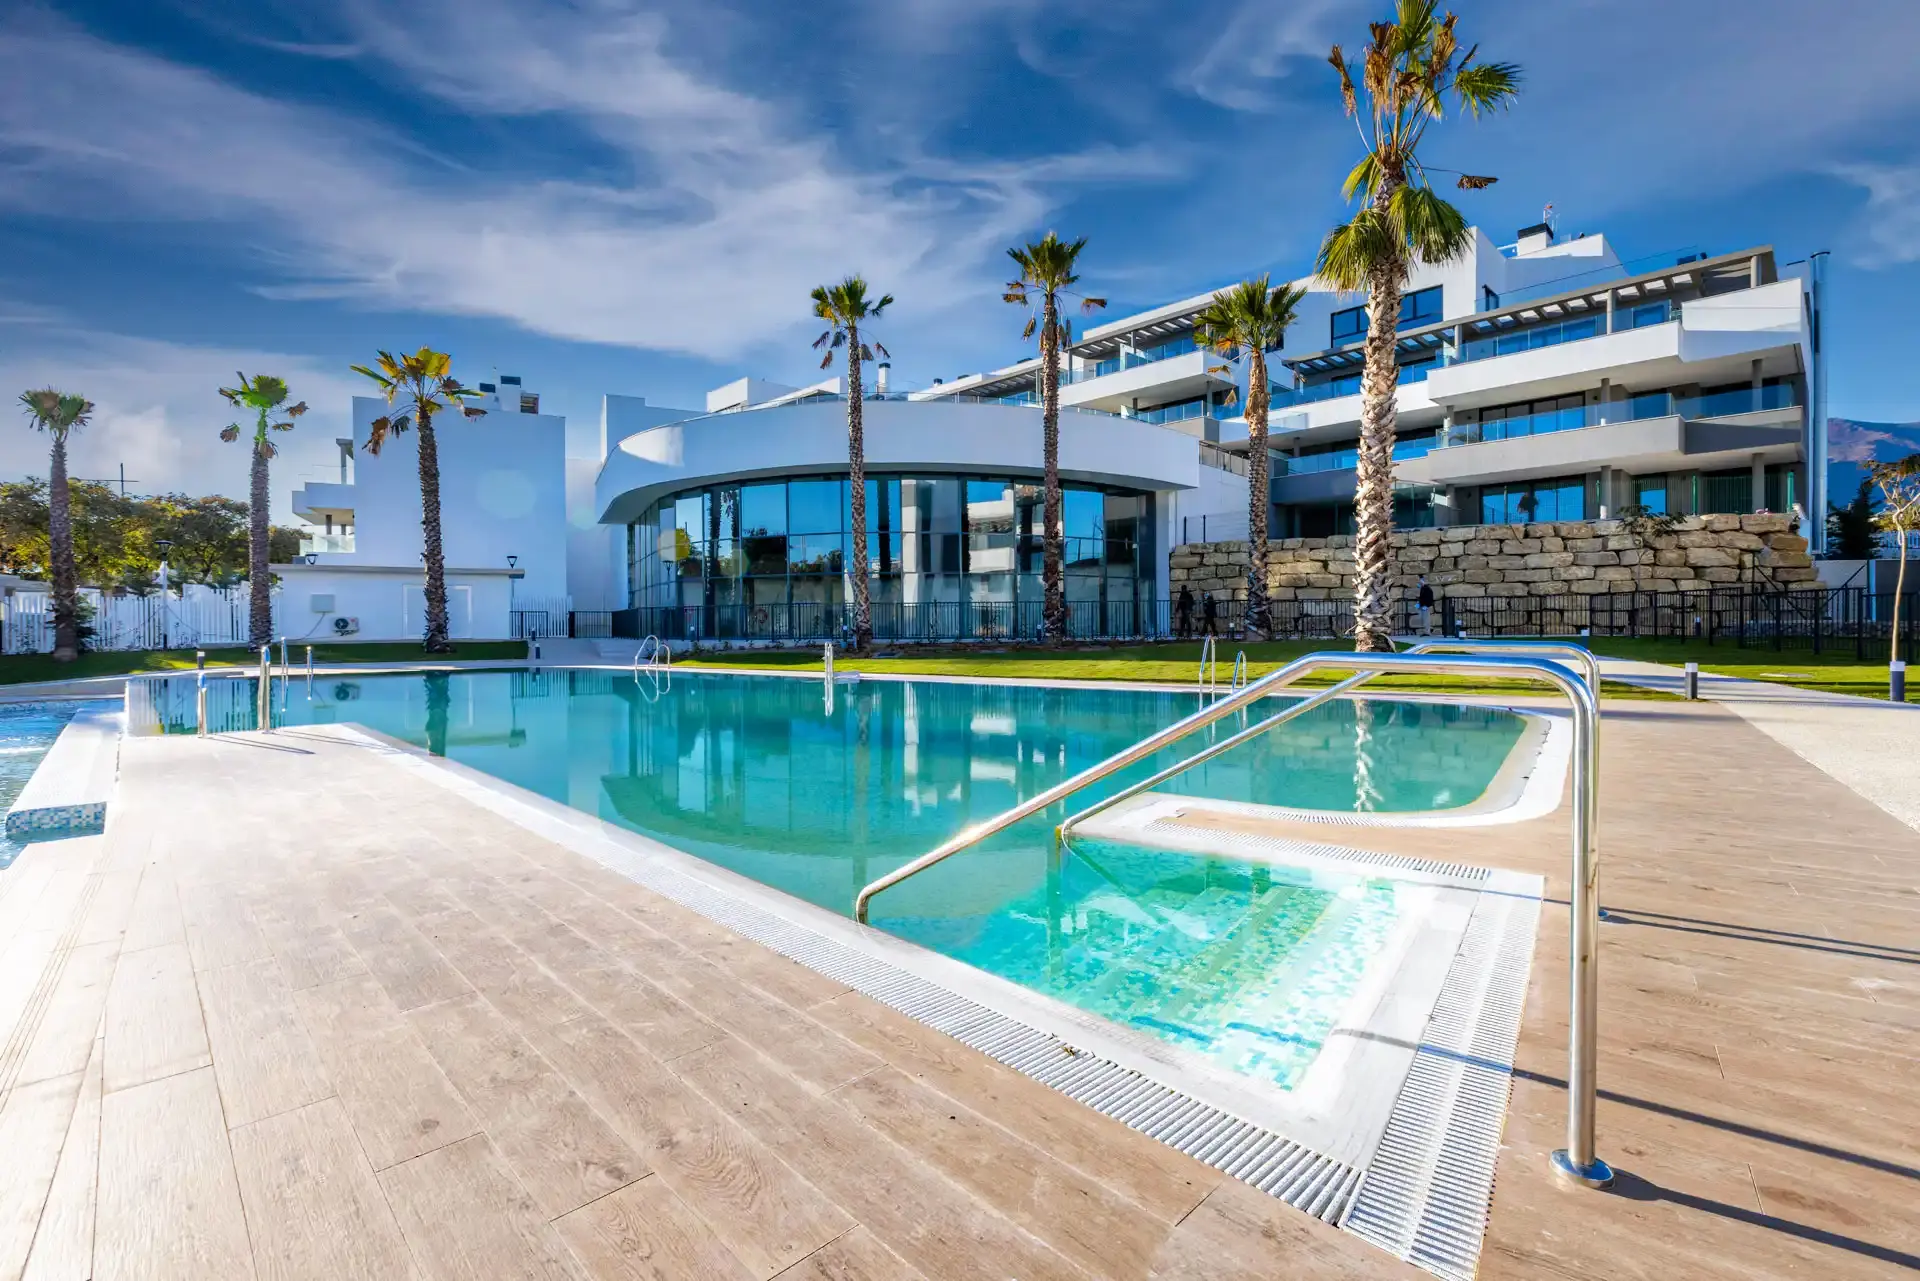 Mesas Homes offers a total of 187 one, two, three or four bedroom apartments located in the city of Estepona. Its privileged location offers beautiful views over the bay of Estepona.